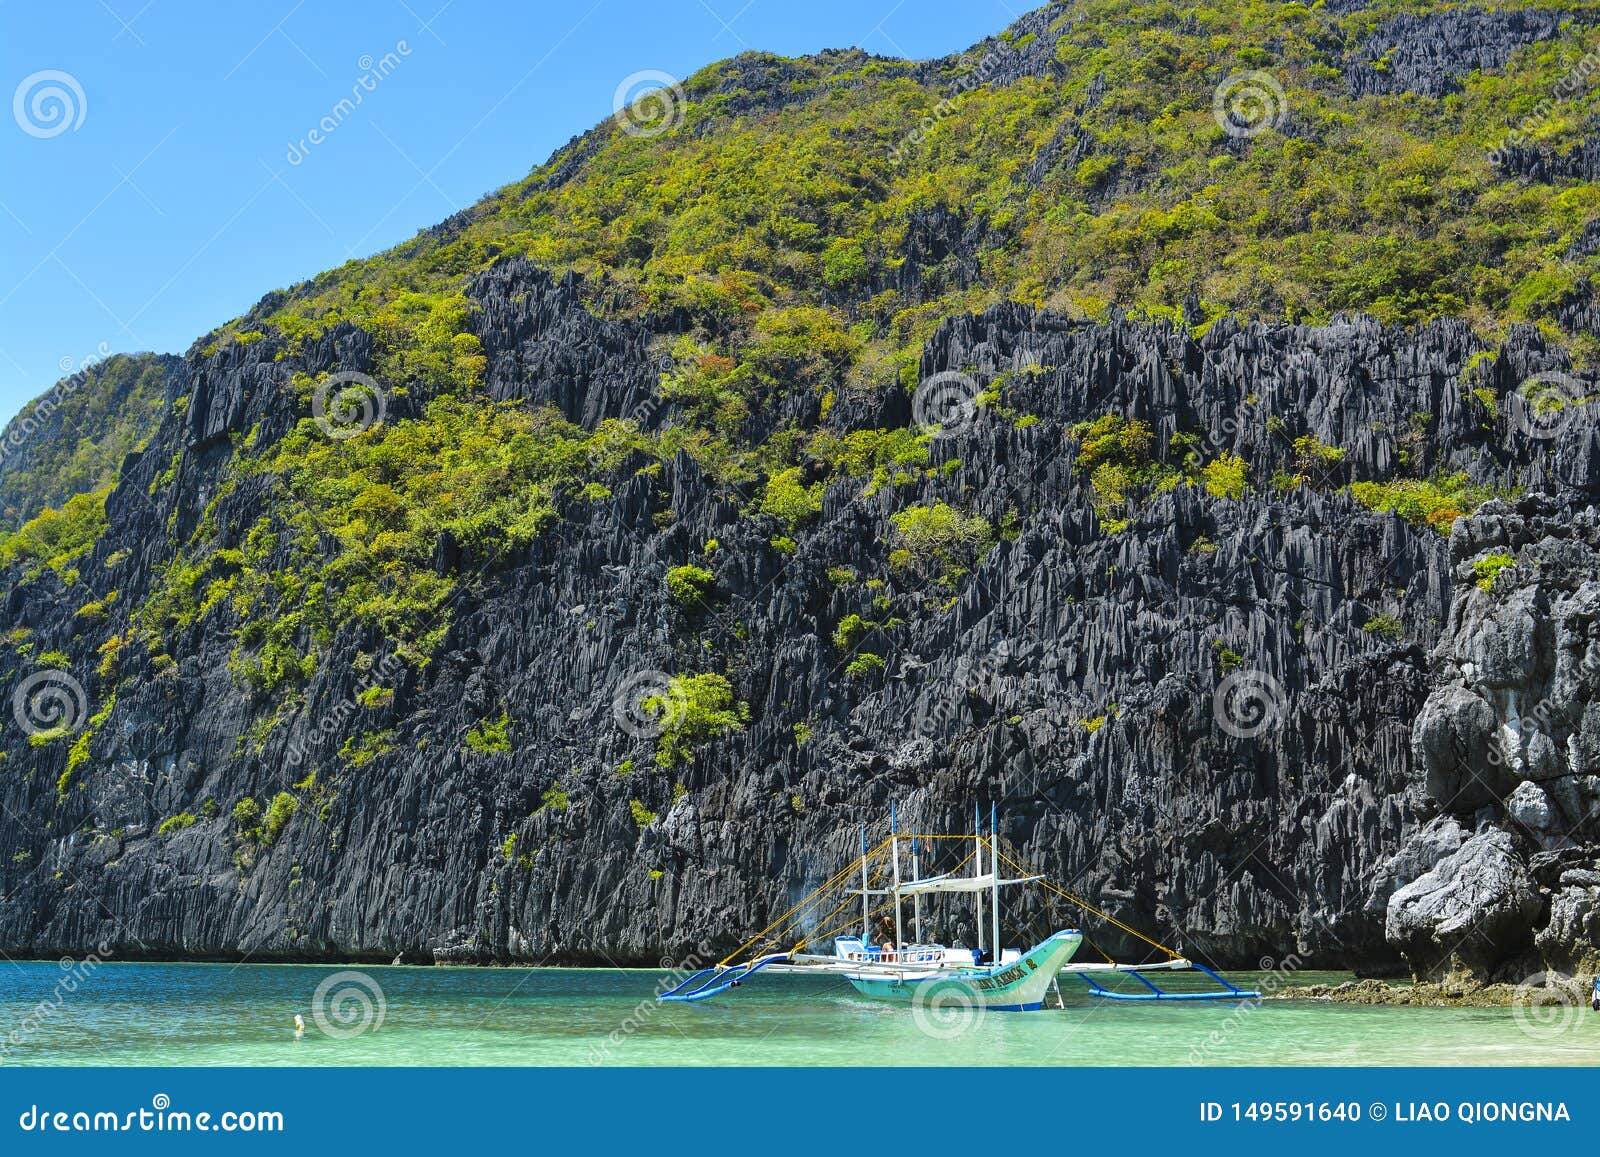 View of El Nido. Itâ€™s a 1st Class Municipality in the Province of